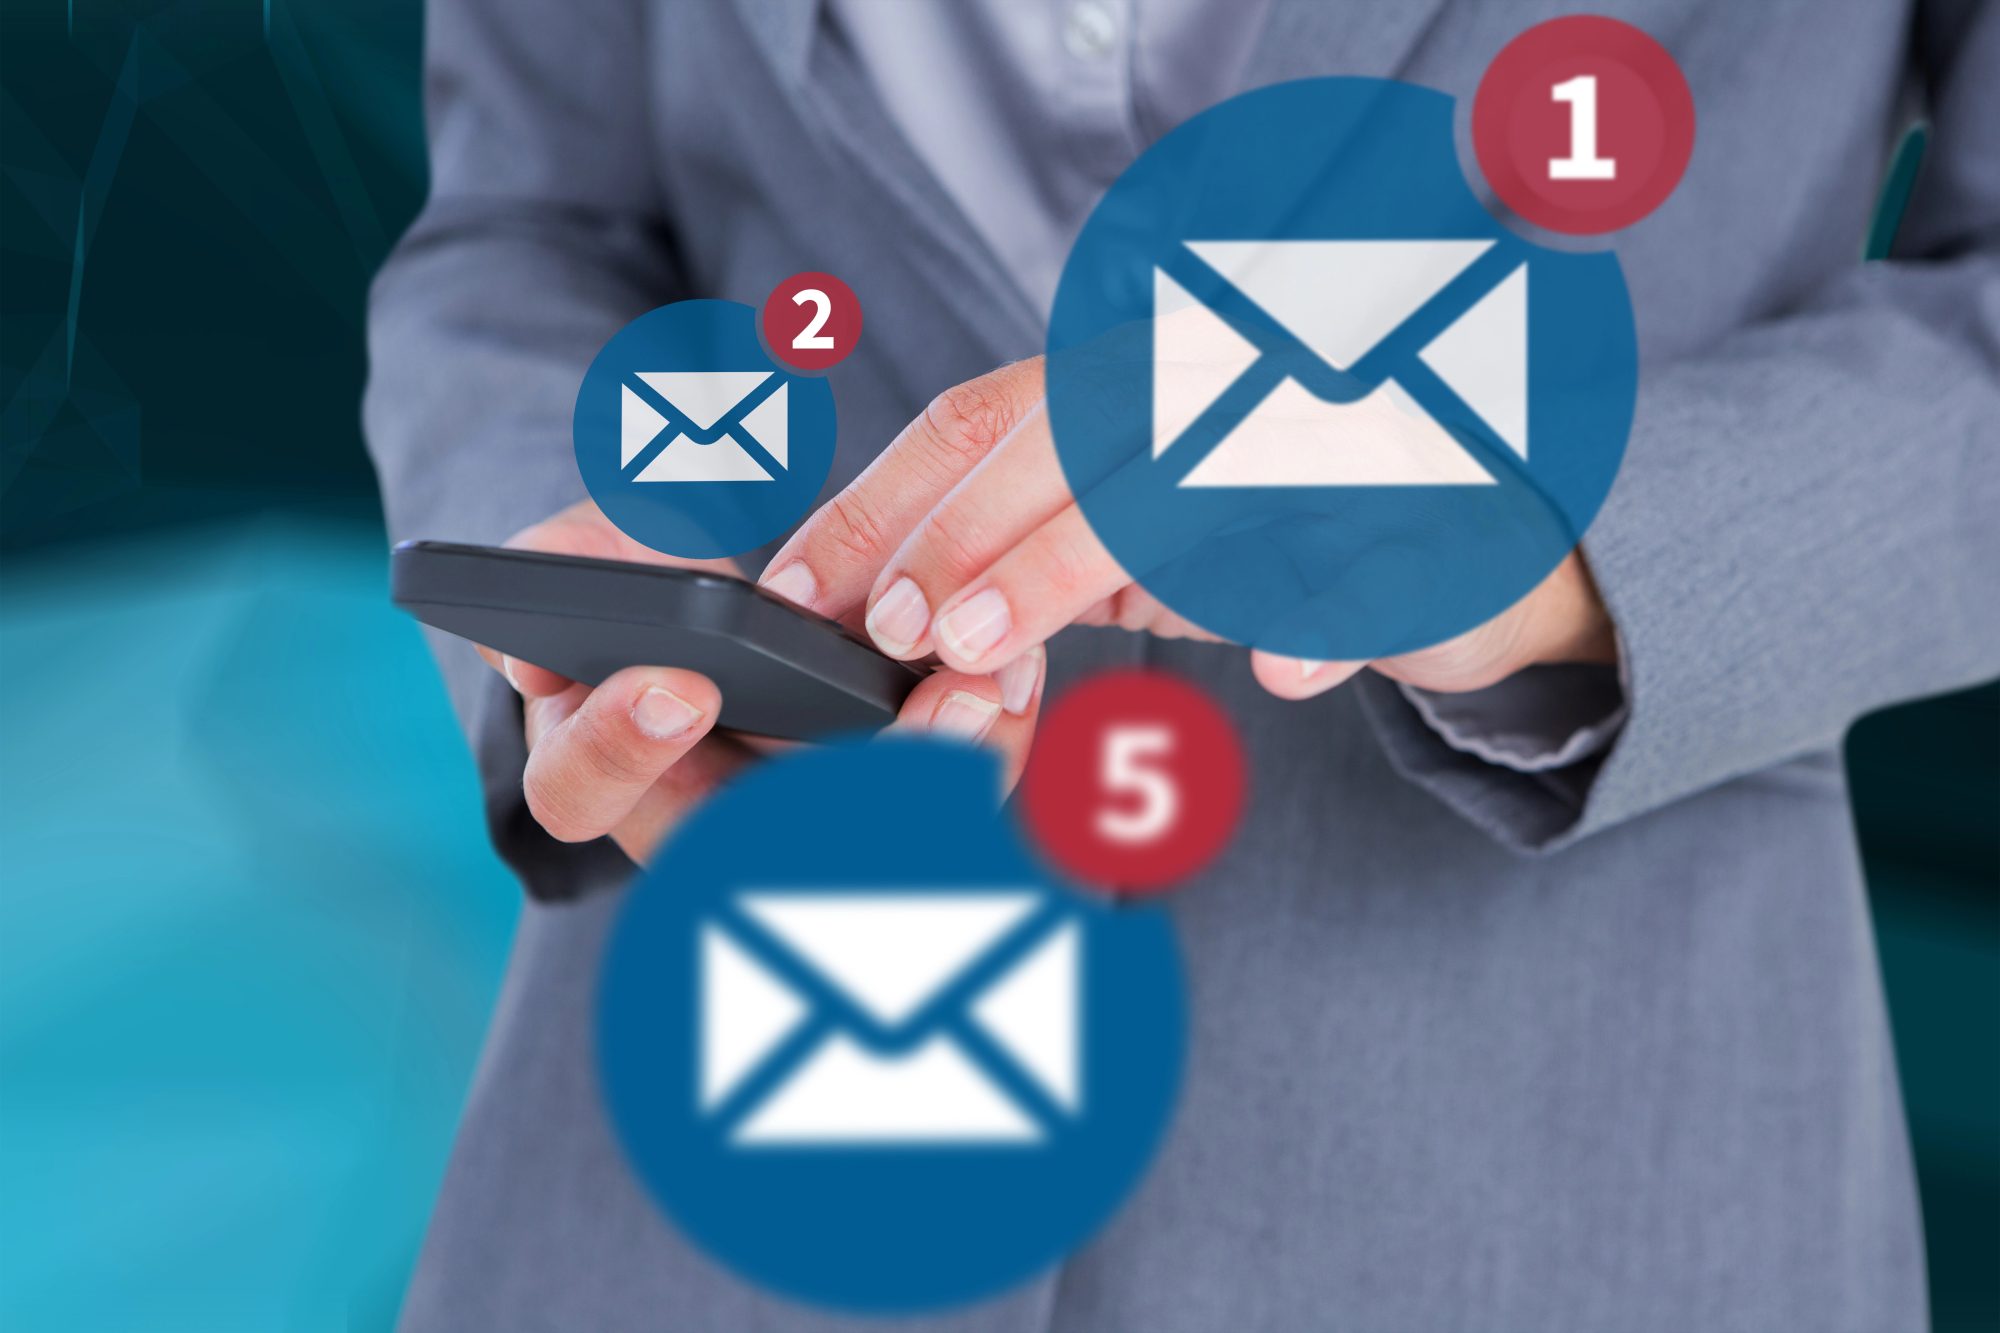 A person in a suit is using a smartphone with three floating icons of envelopes with red notification circles.